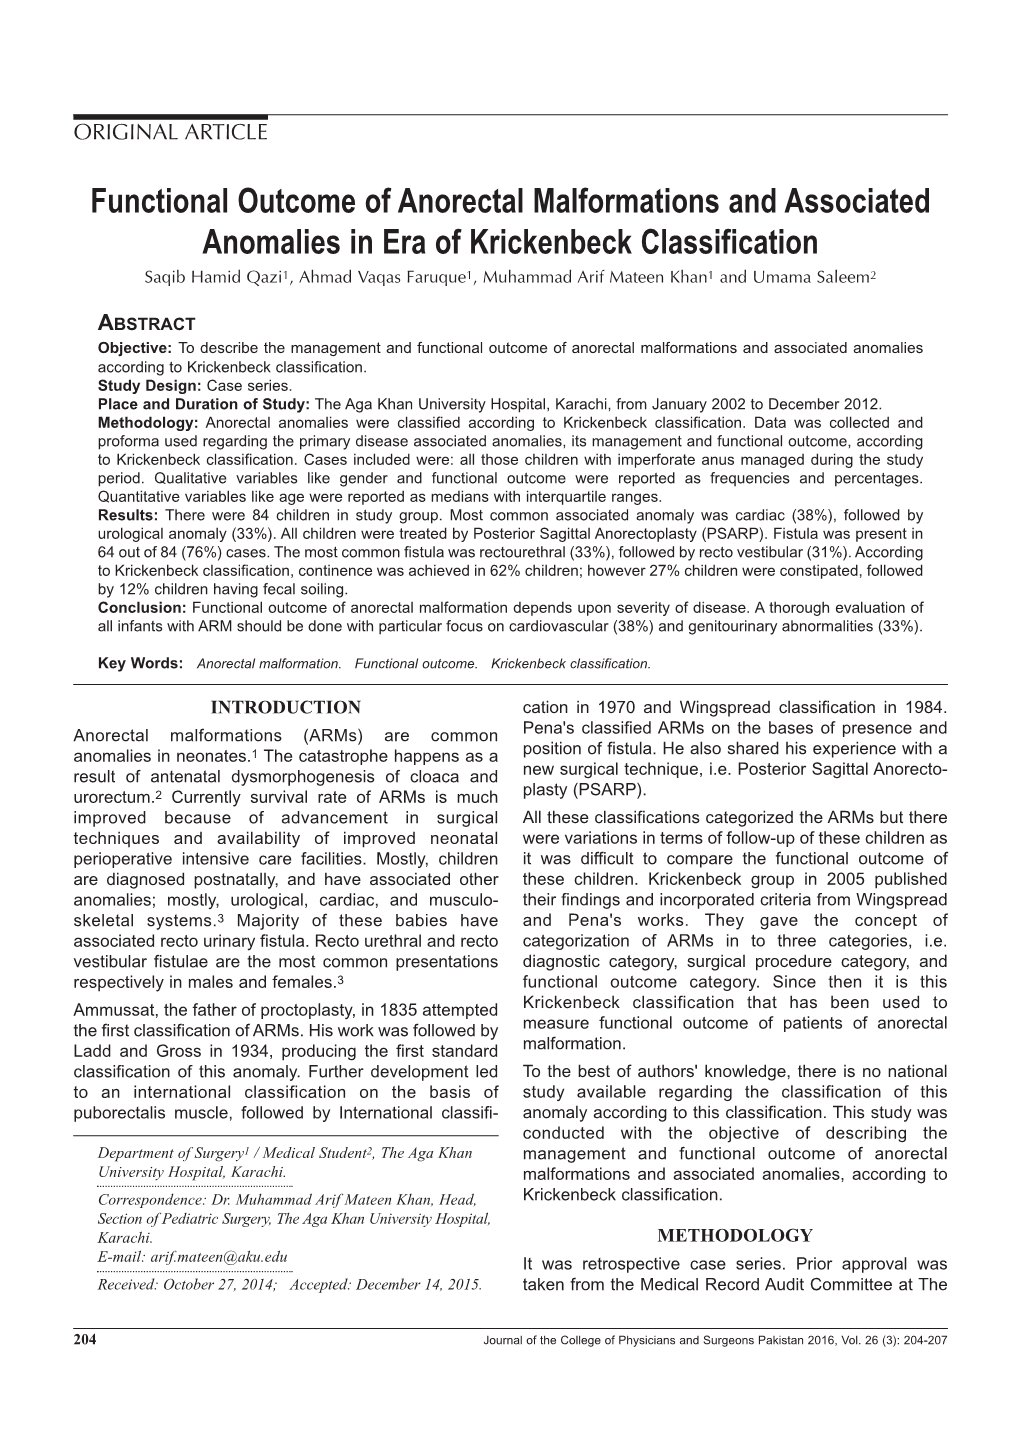 Functional Outcome of Anorectal Malformations and Associated Anomalies in Era of Krickenbeck Classification